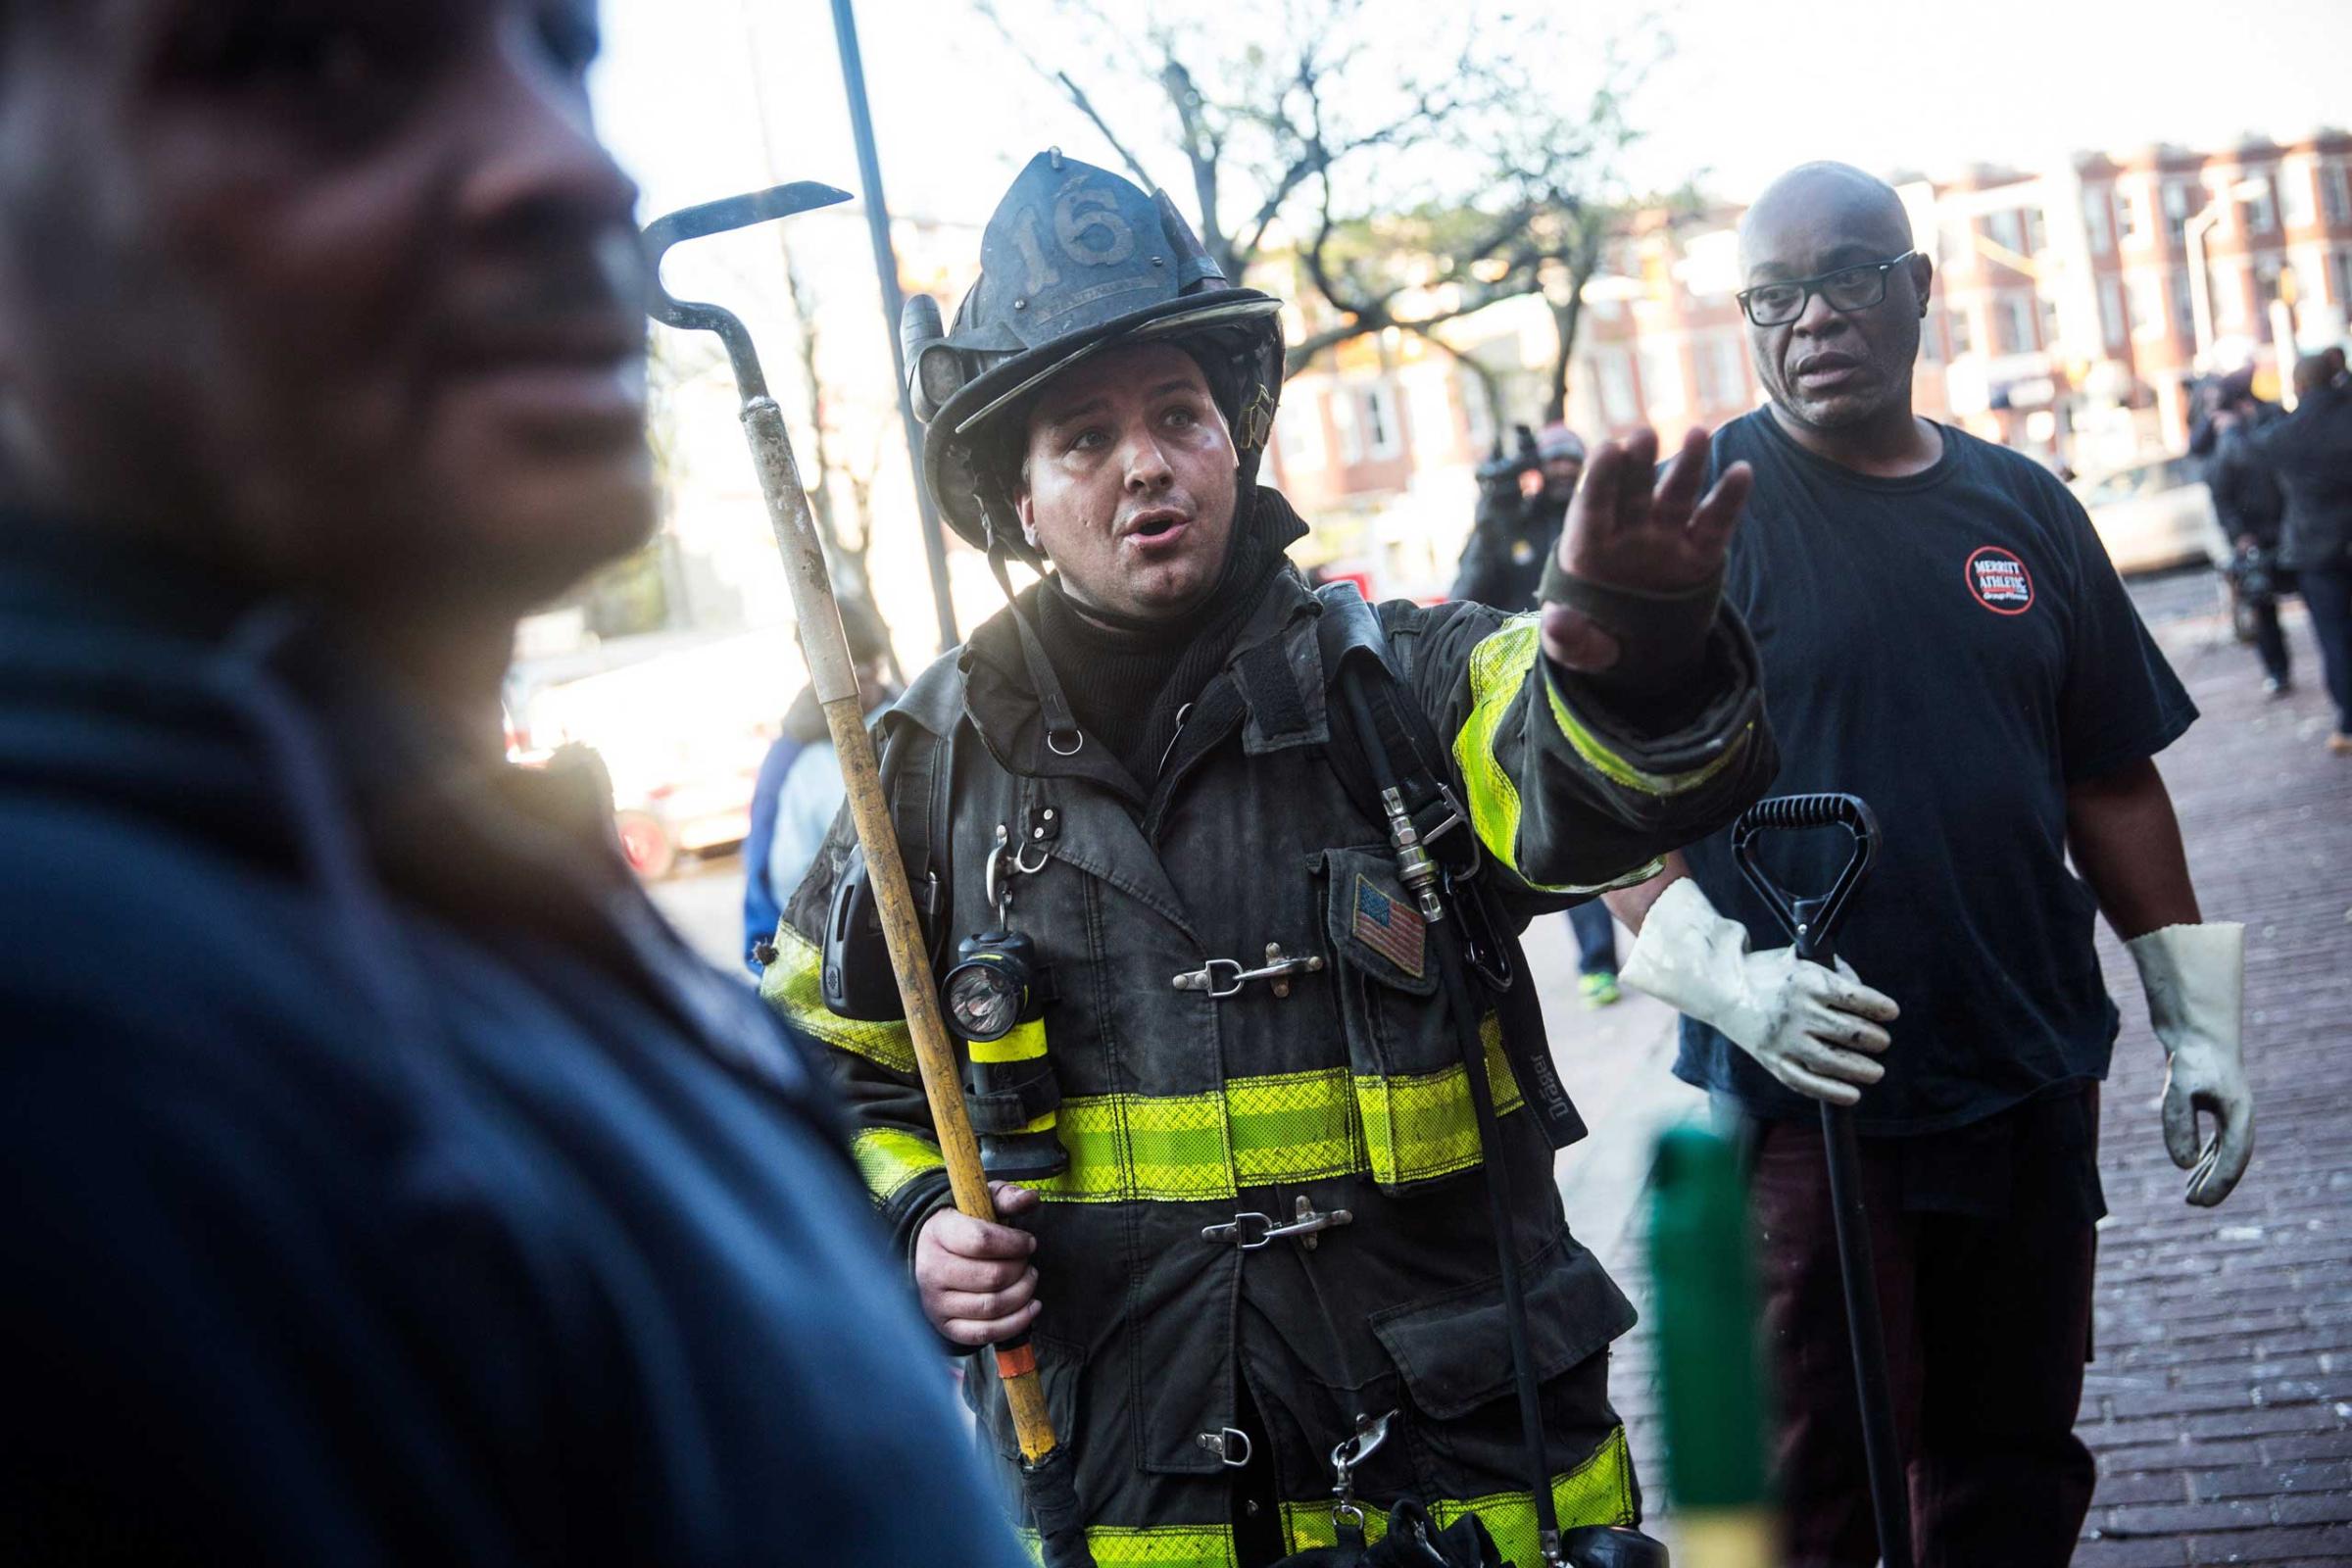 Baltimore firefighters talk to community members cleaning up a CVS pharmacy that was set on fire yesterday during riots in Baltimore on April 28, 2015.